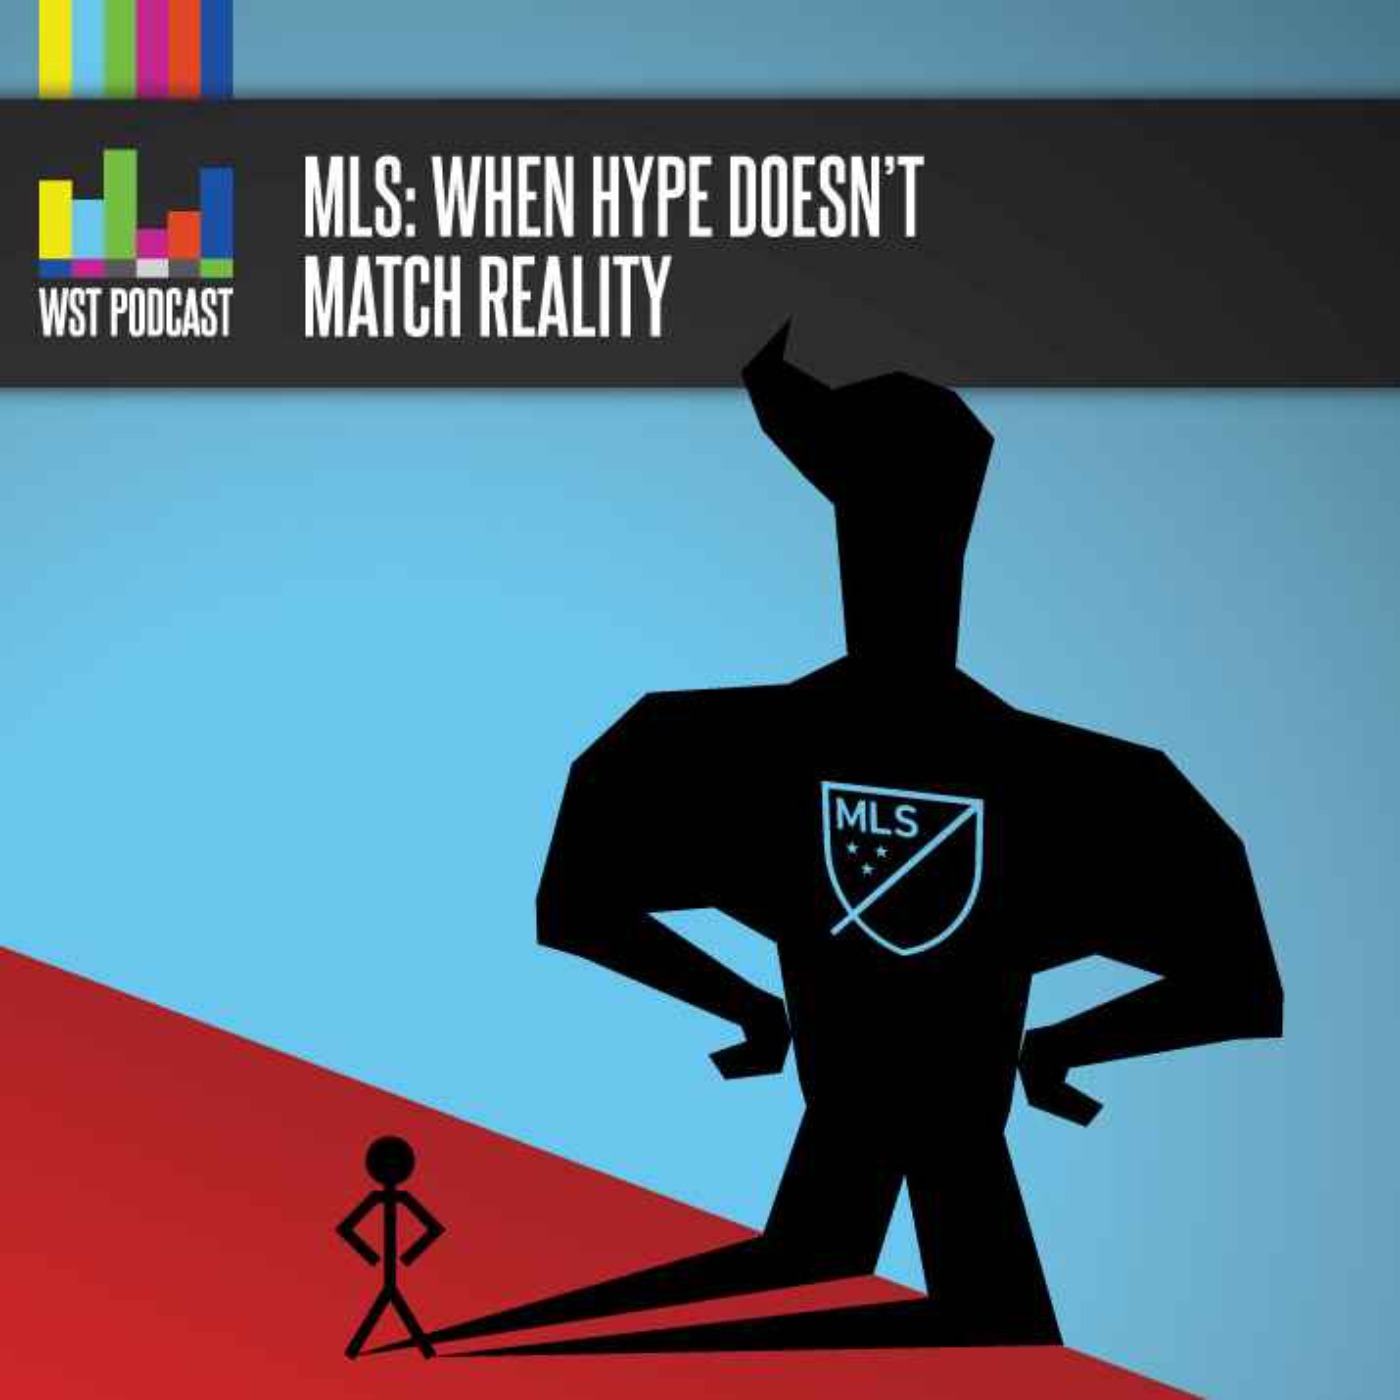 MLS: When Hype Doesn’t Match Reality